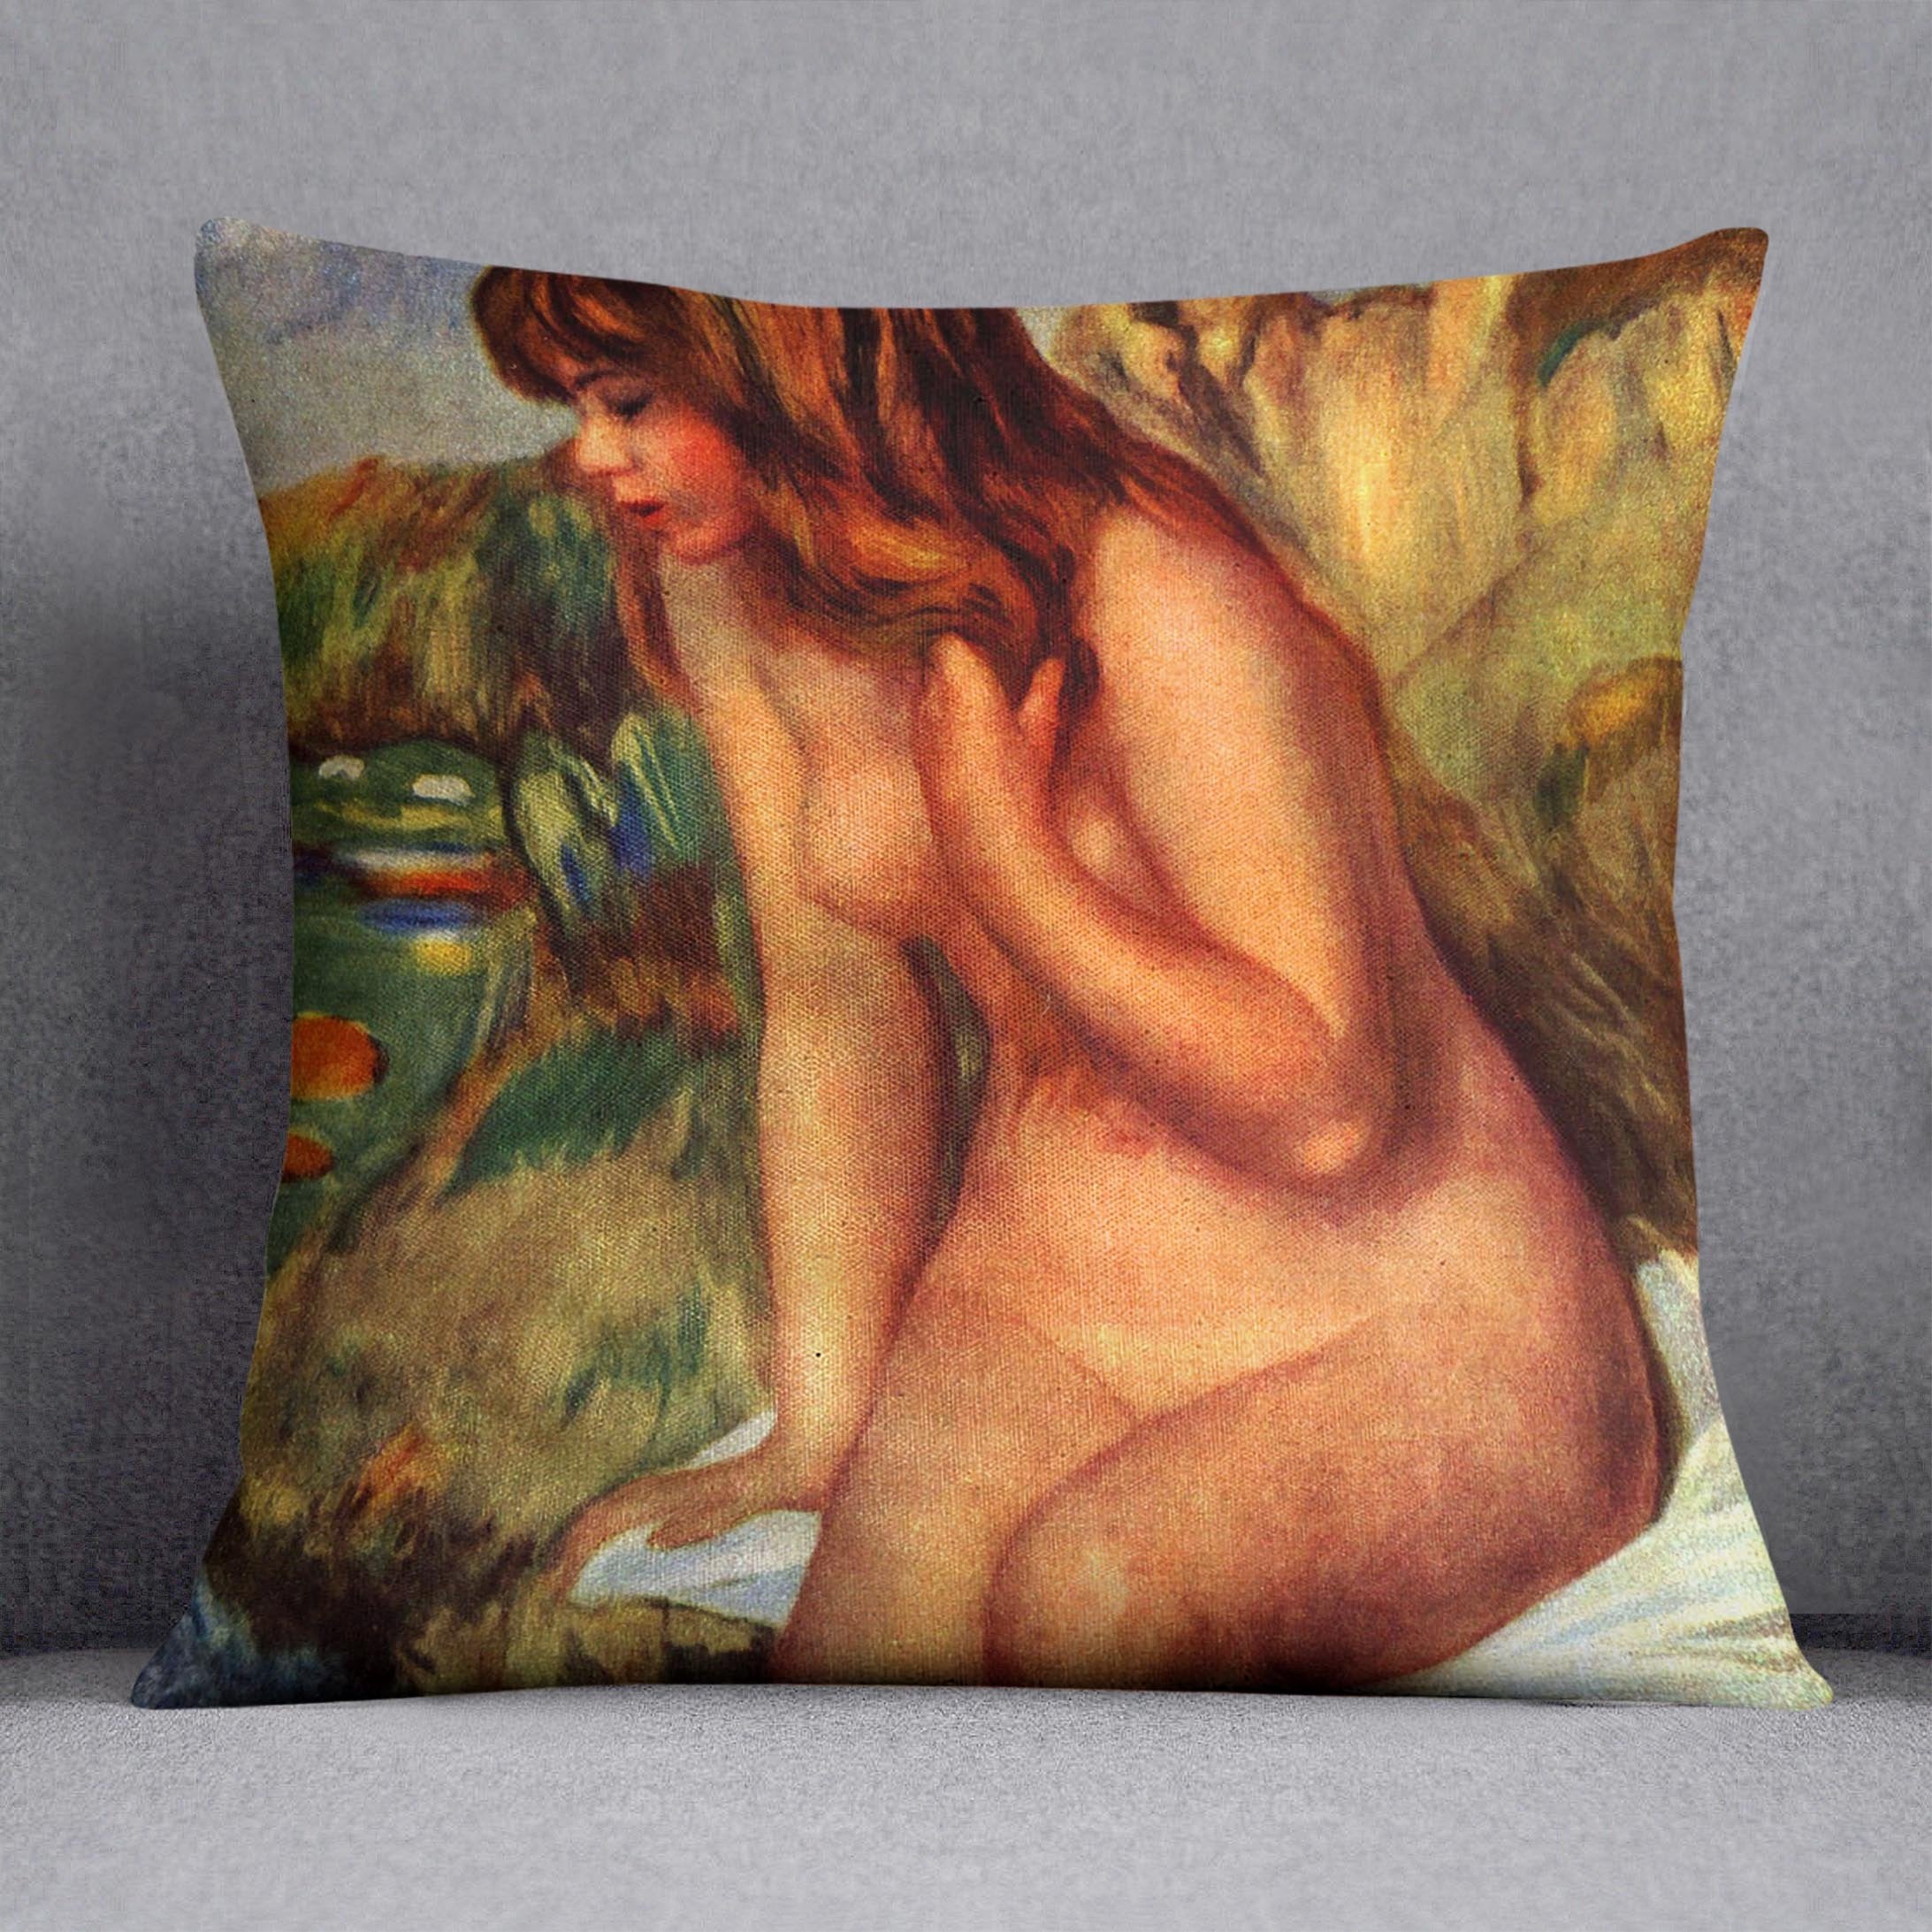 Bathing sitting on a rock by Renoir Throw Pillow